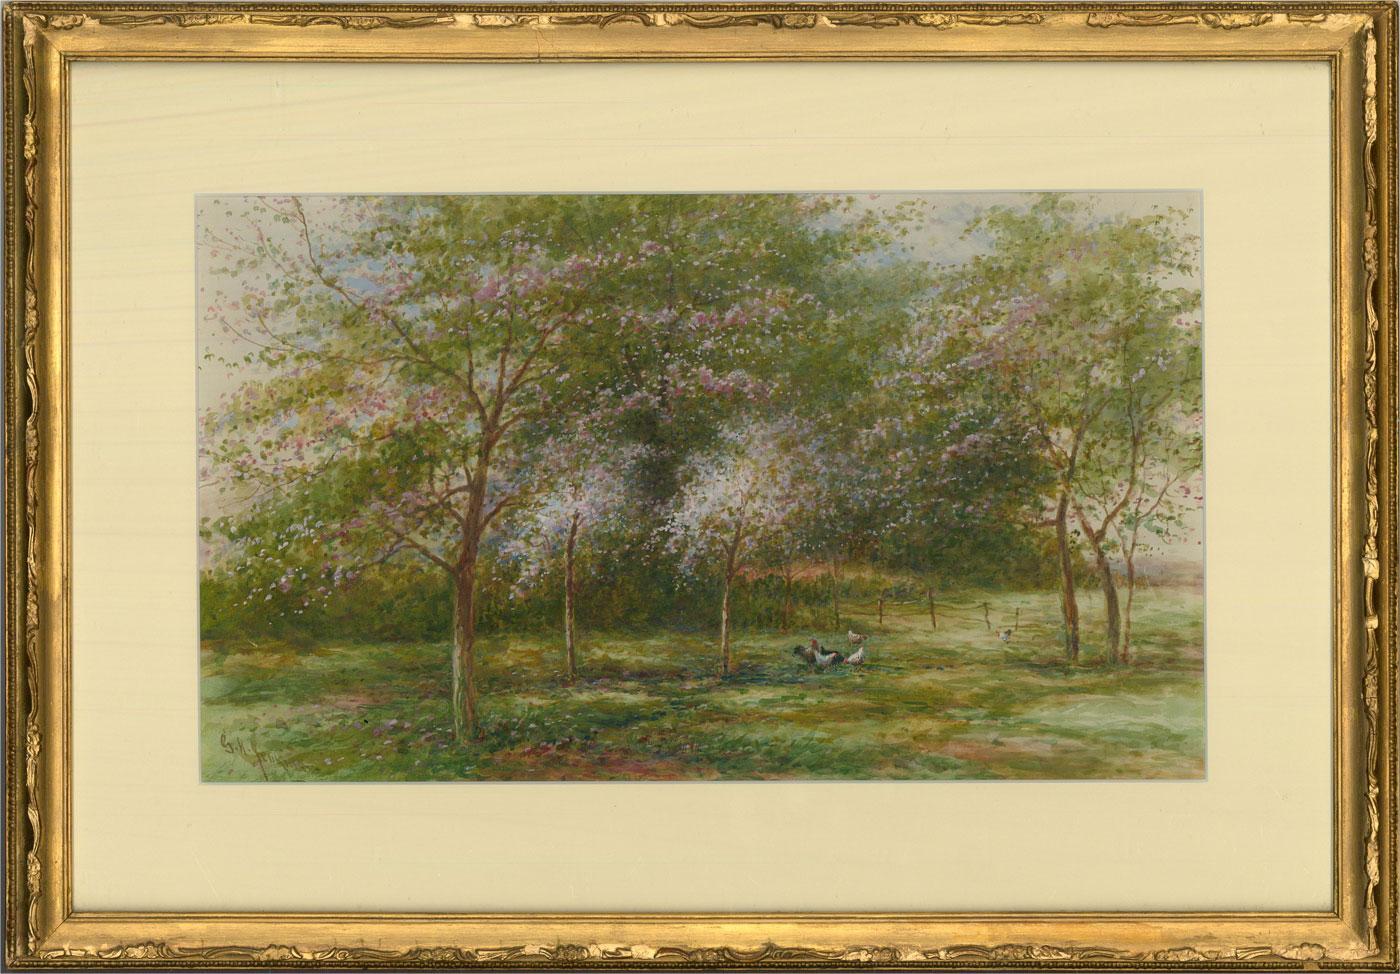 An idyllic spring scene in watercolour and body colour depicting blossoming apple trees in an orchard. Chickens graze in the shade of the trees. Presented glazed in a cream mount and a gilt frame with ornate edges. Signed to the lower-left edge.